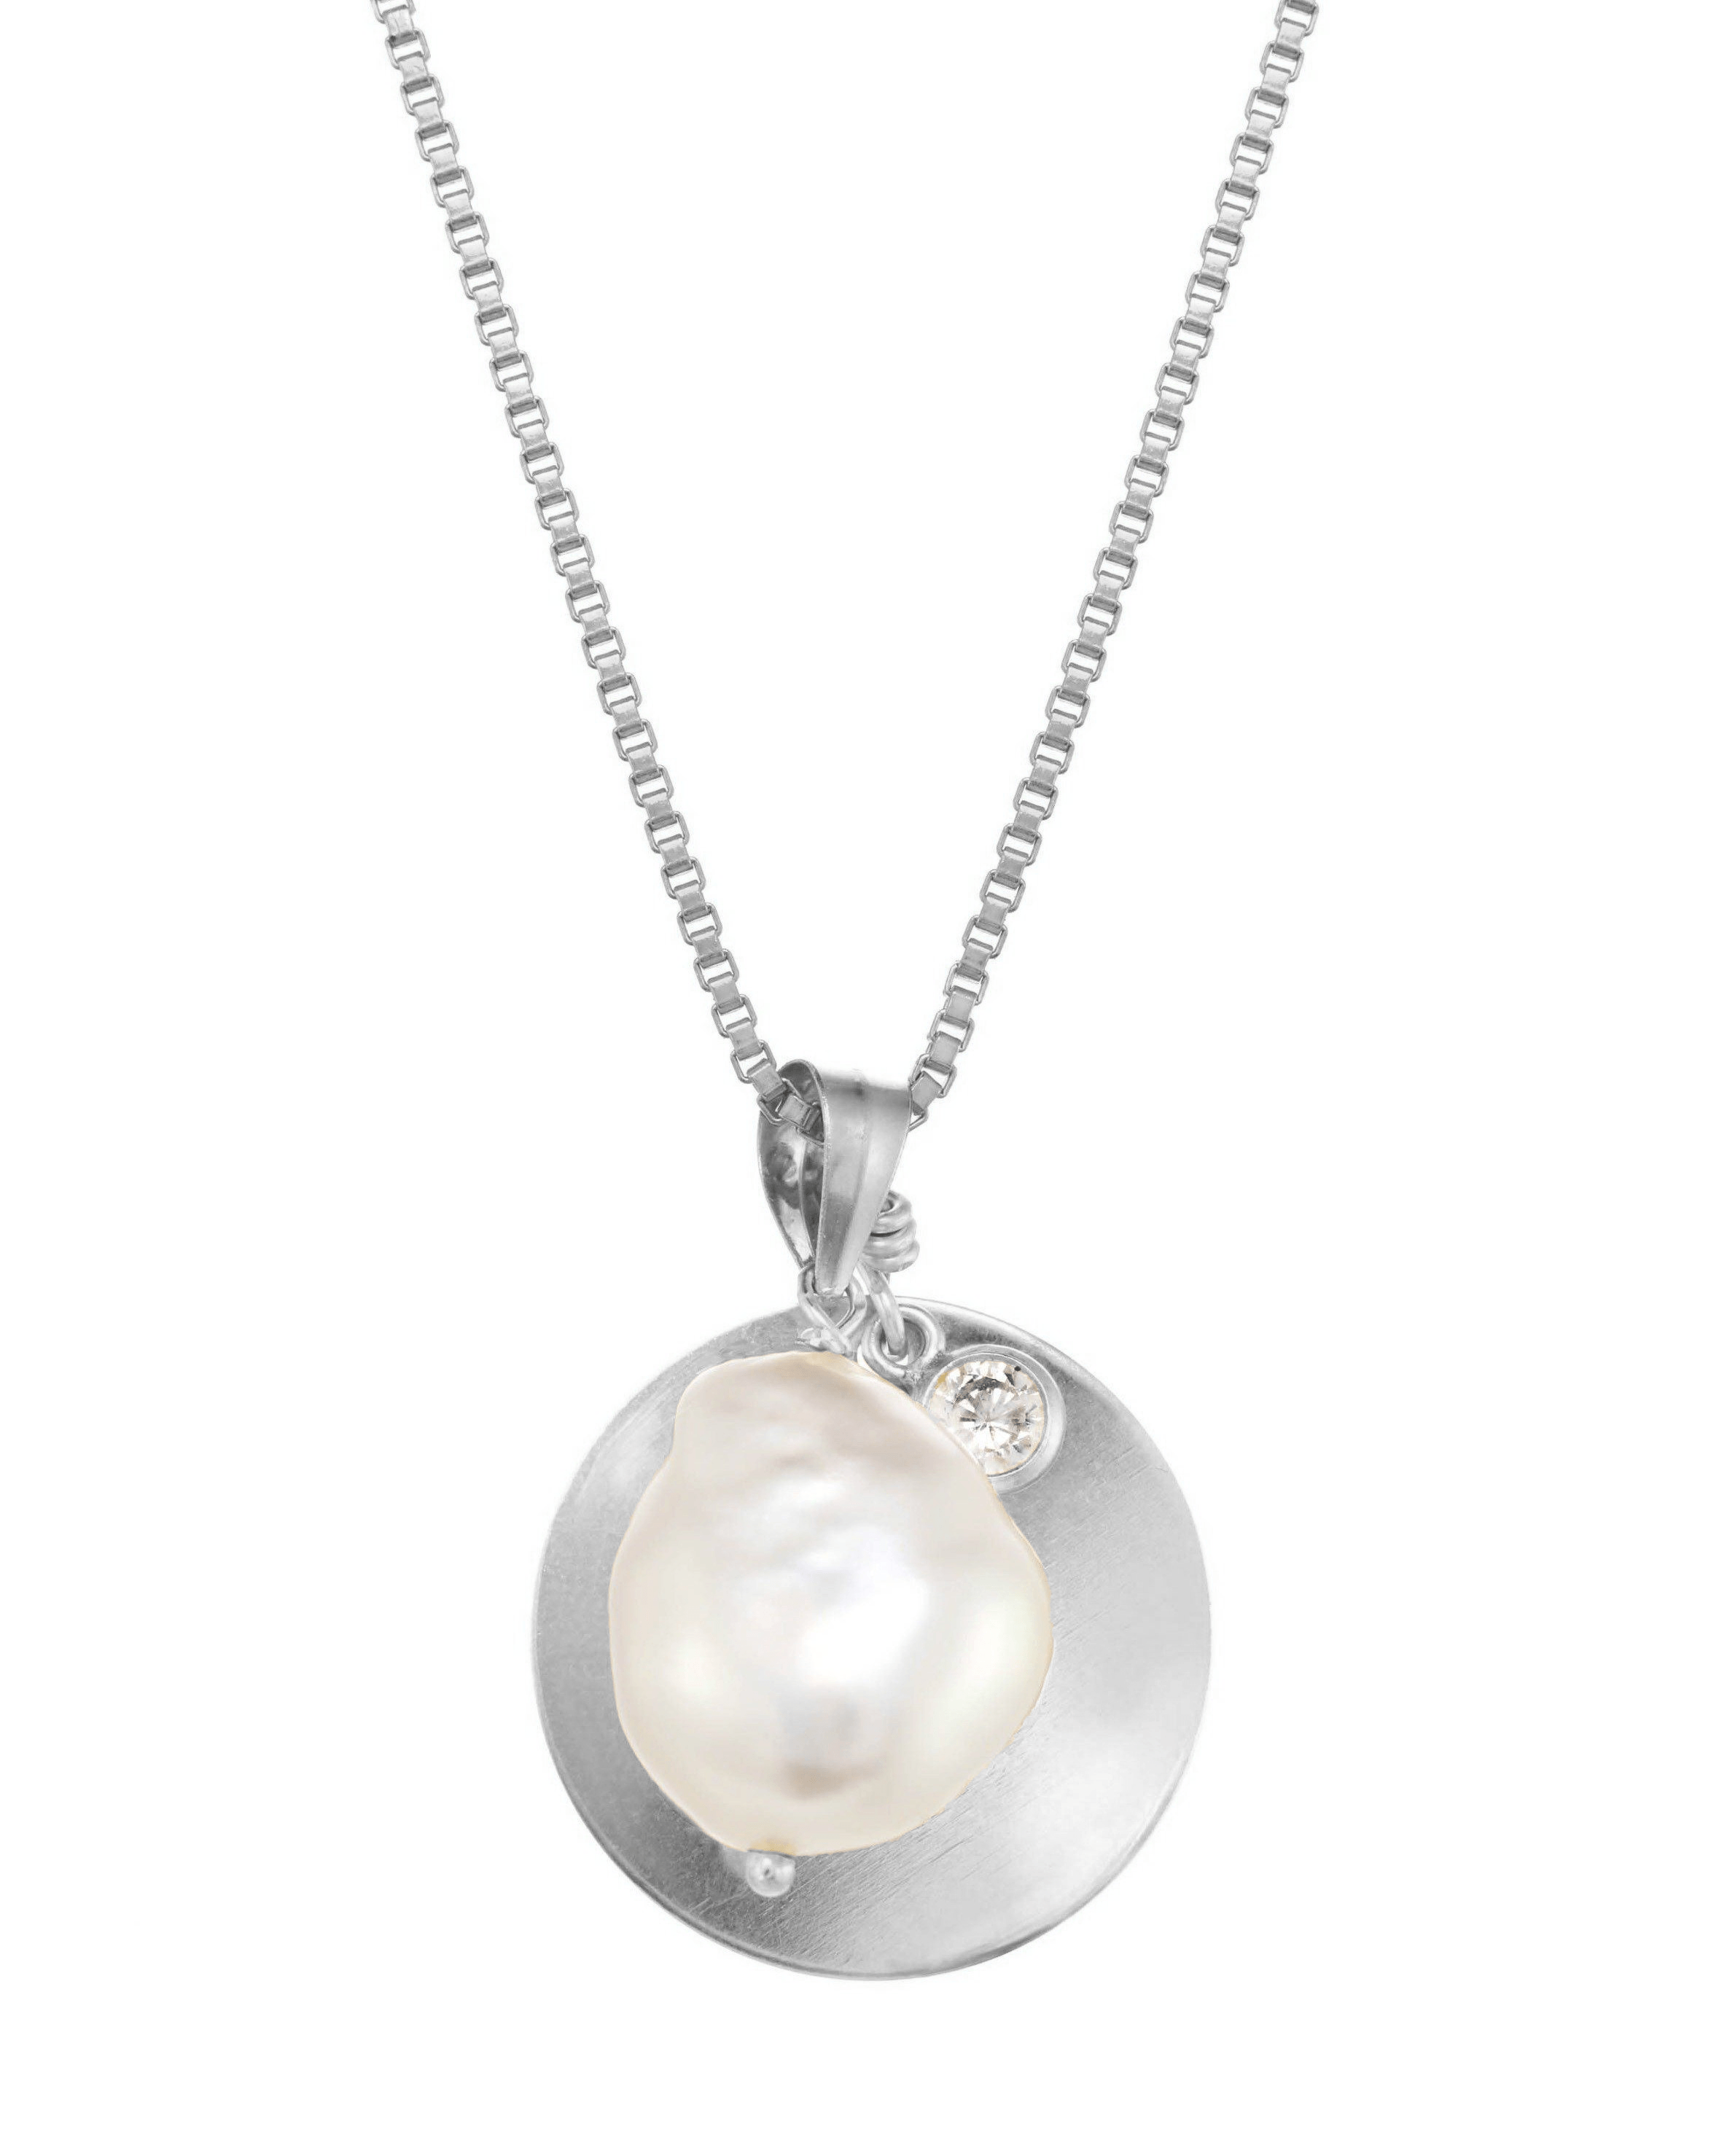 Sylet Necklace by KOZAKH. A 16 to 18 inch adjustable length necklace, crafted in Sterling Silver, featuring a 9mm Oval pearl, a 16mm Coin medallion, and a 3mm Cubic Zirconia bezel.